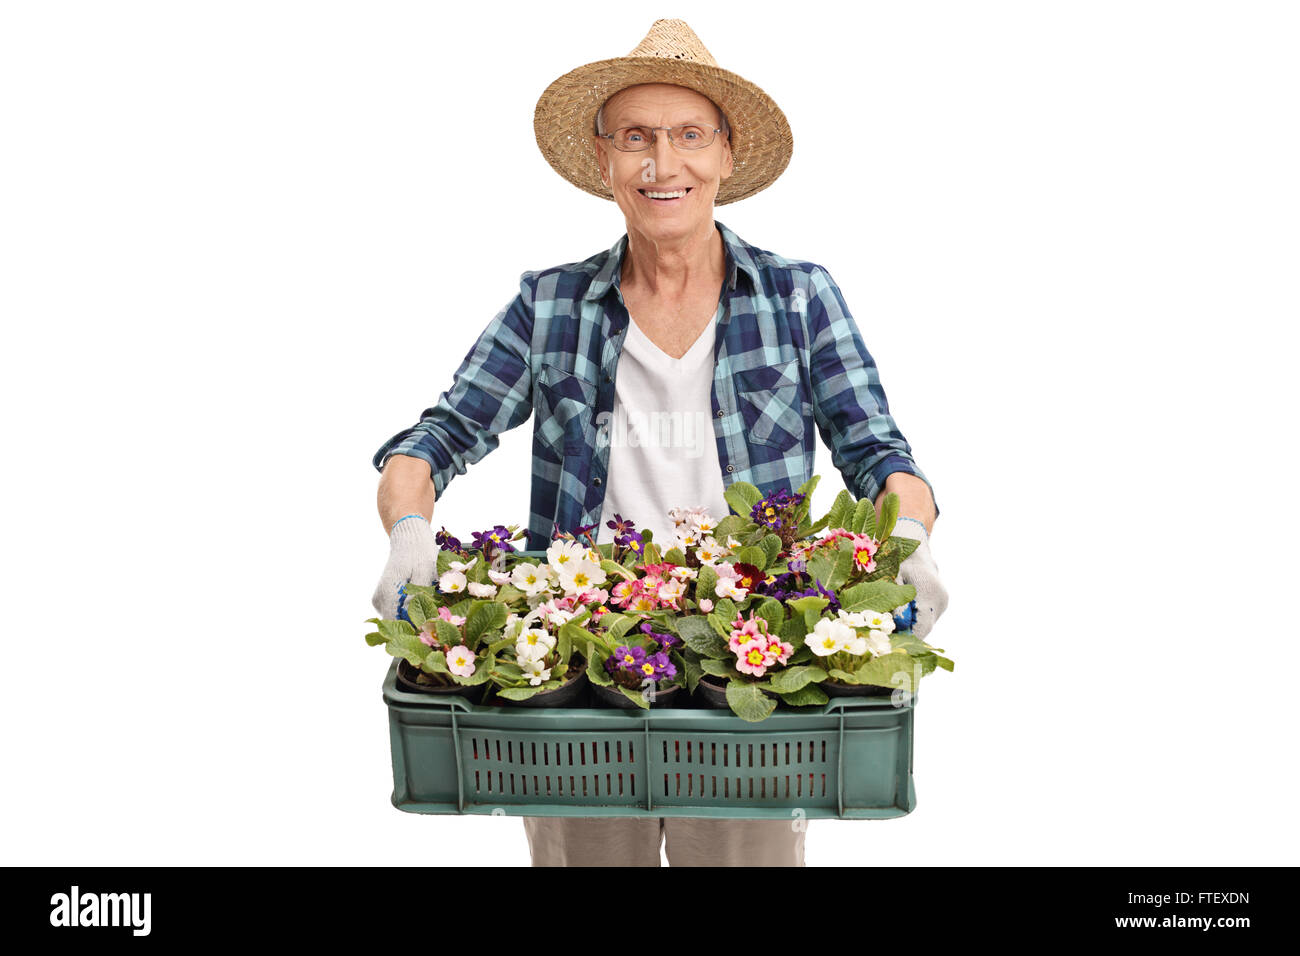 Senior gardener holding a plastic crate full of flowerpots and flowers isolated on white background Stock Photo